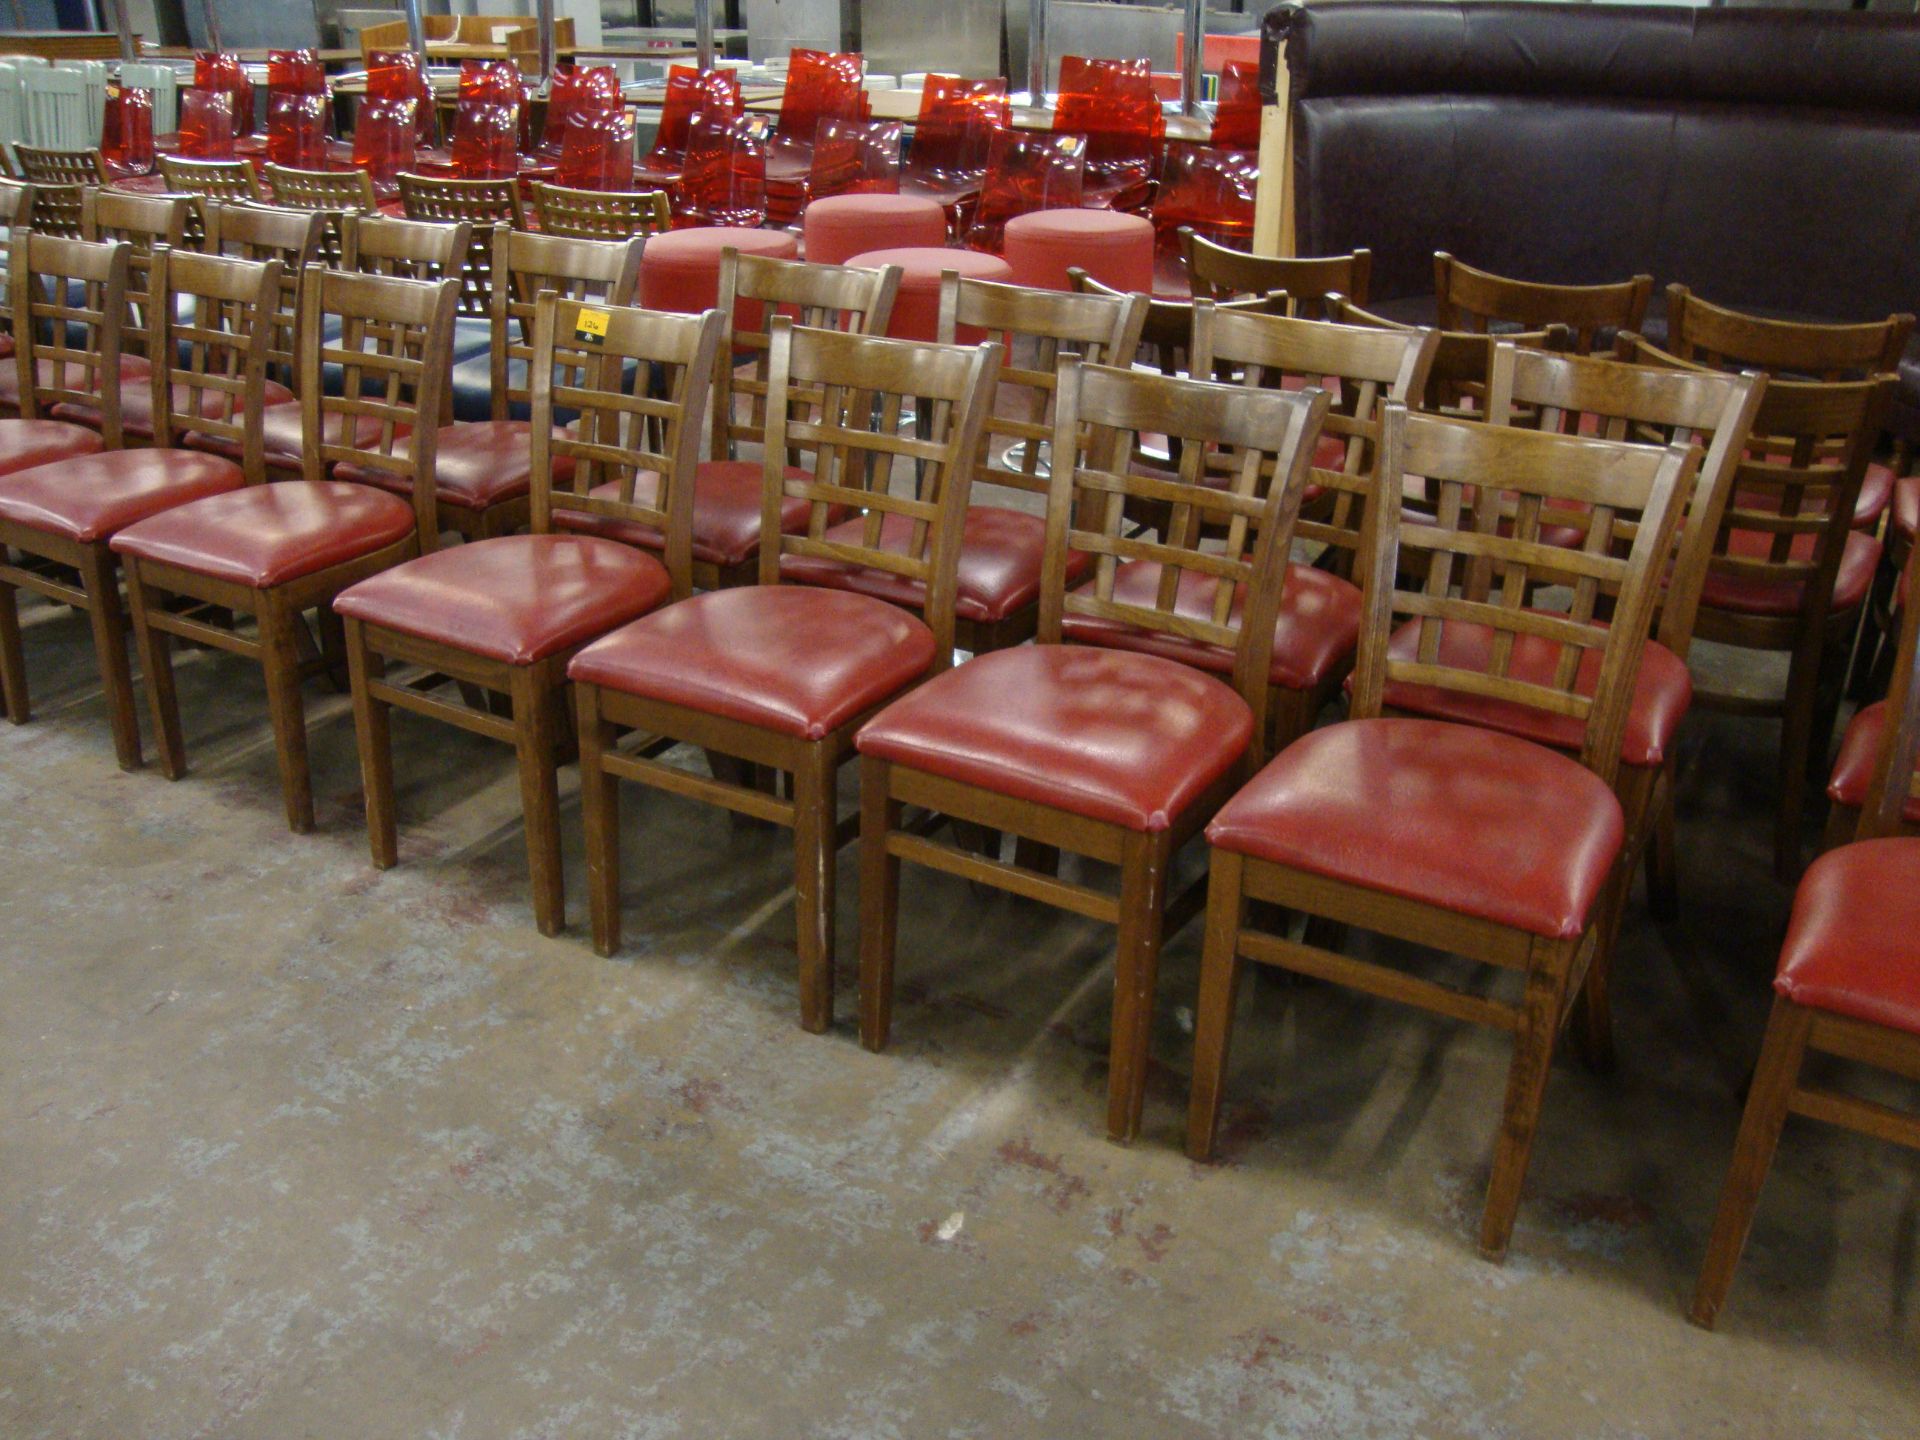 8 off wooden chairs with red upholstered bases. NB lots 121 – 129 consist of different quantities of - Image 2 of 3